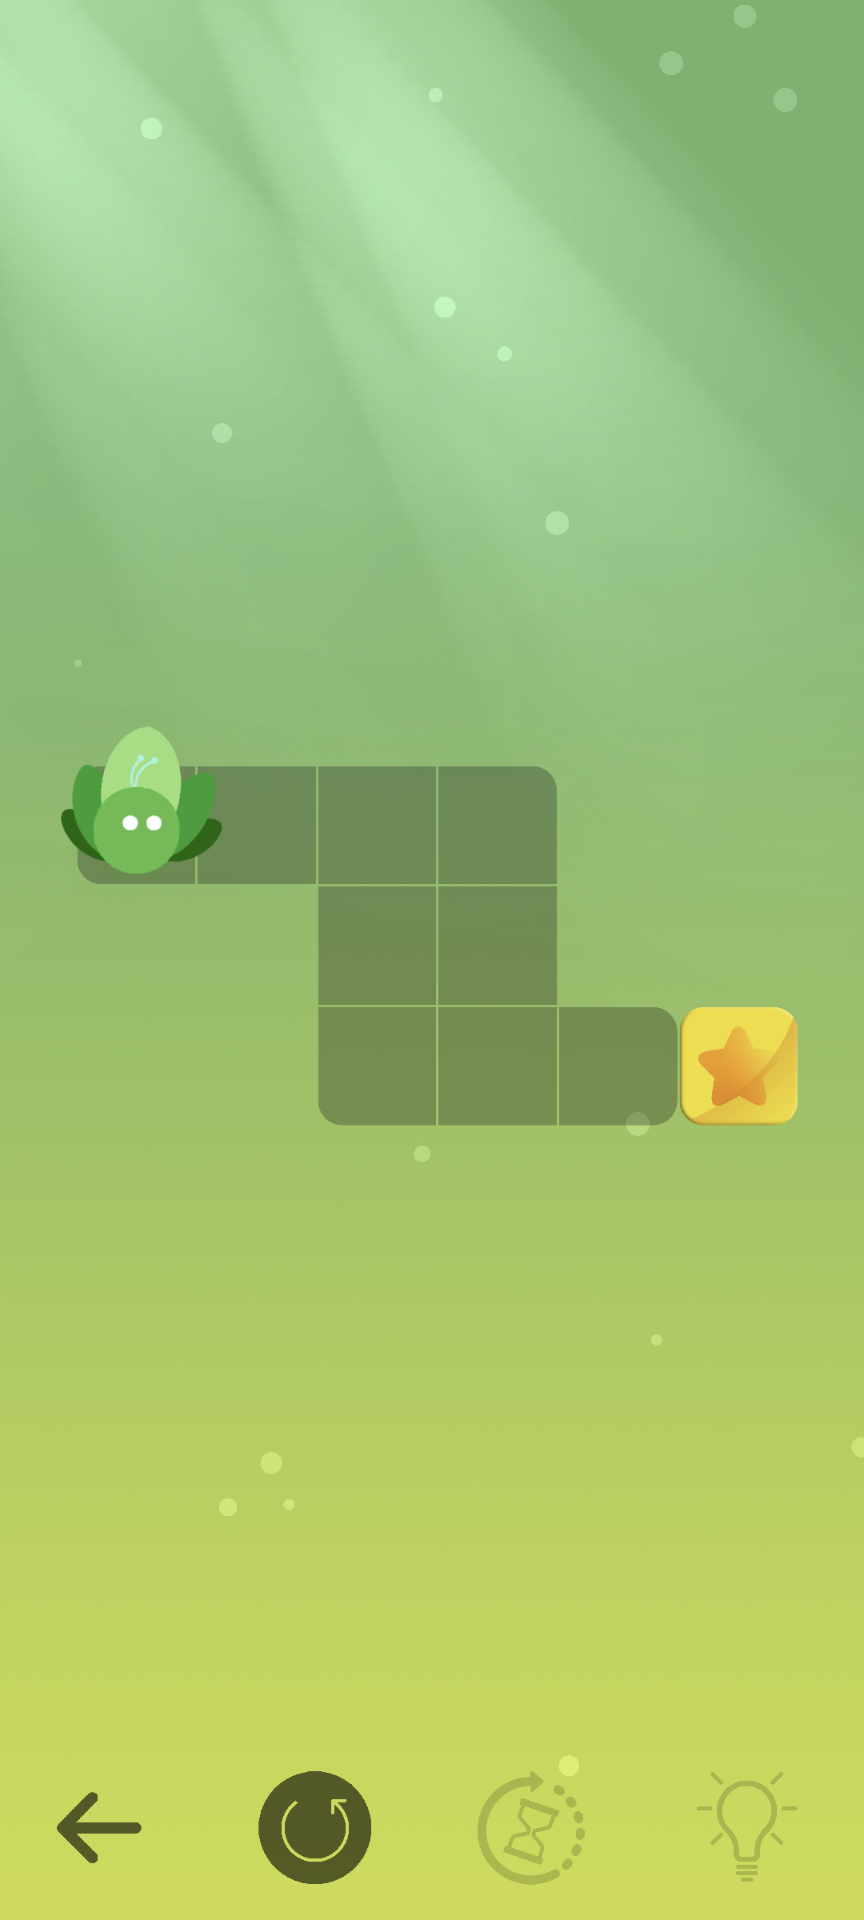 Screenshot 1 of Tiles - Puzzle Game 0.5.3